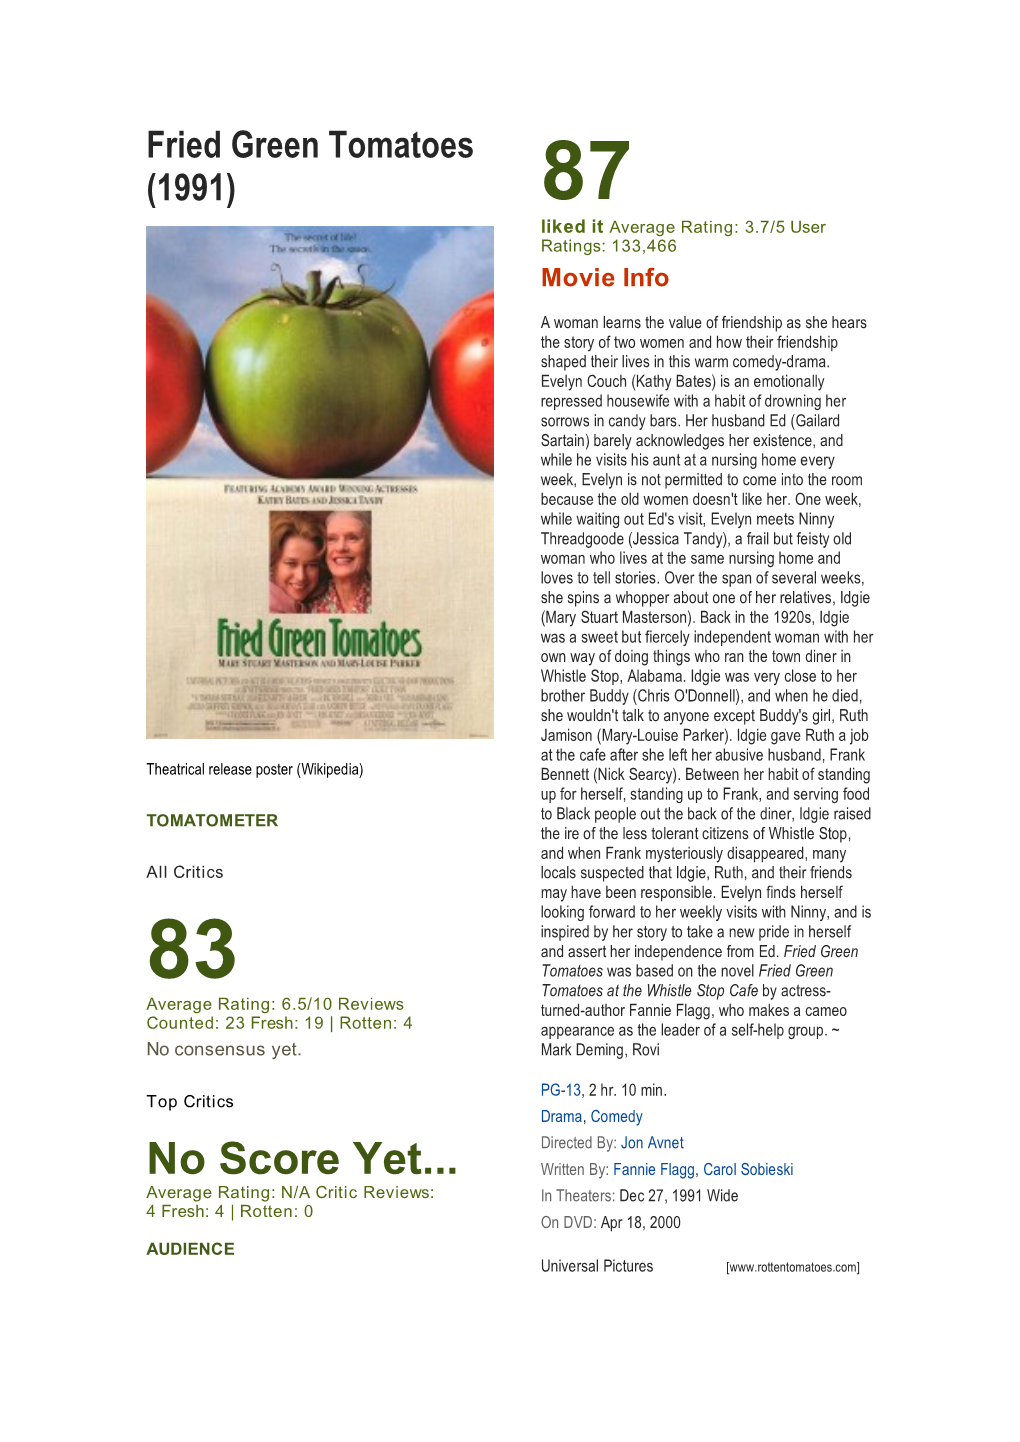 Fried Green Tomatoes (1991) 87 Liked It Average Rating: 3.7/5 User Ratings: 133,466 Movie Info